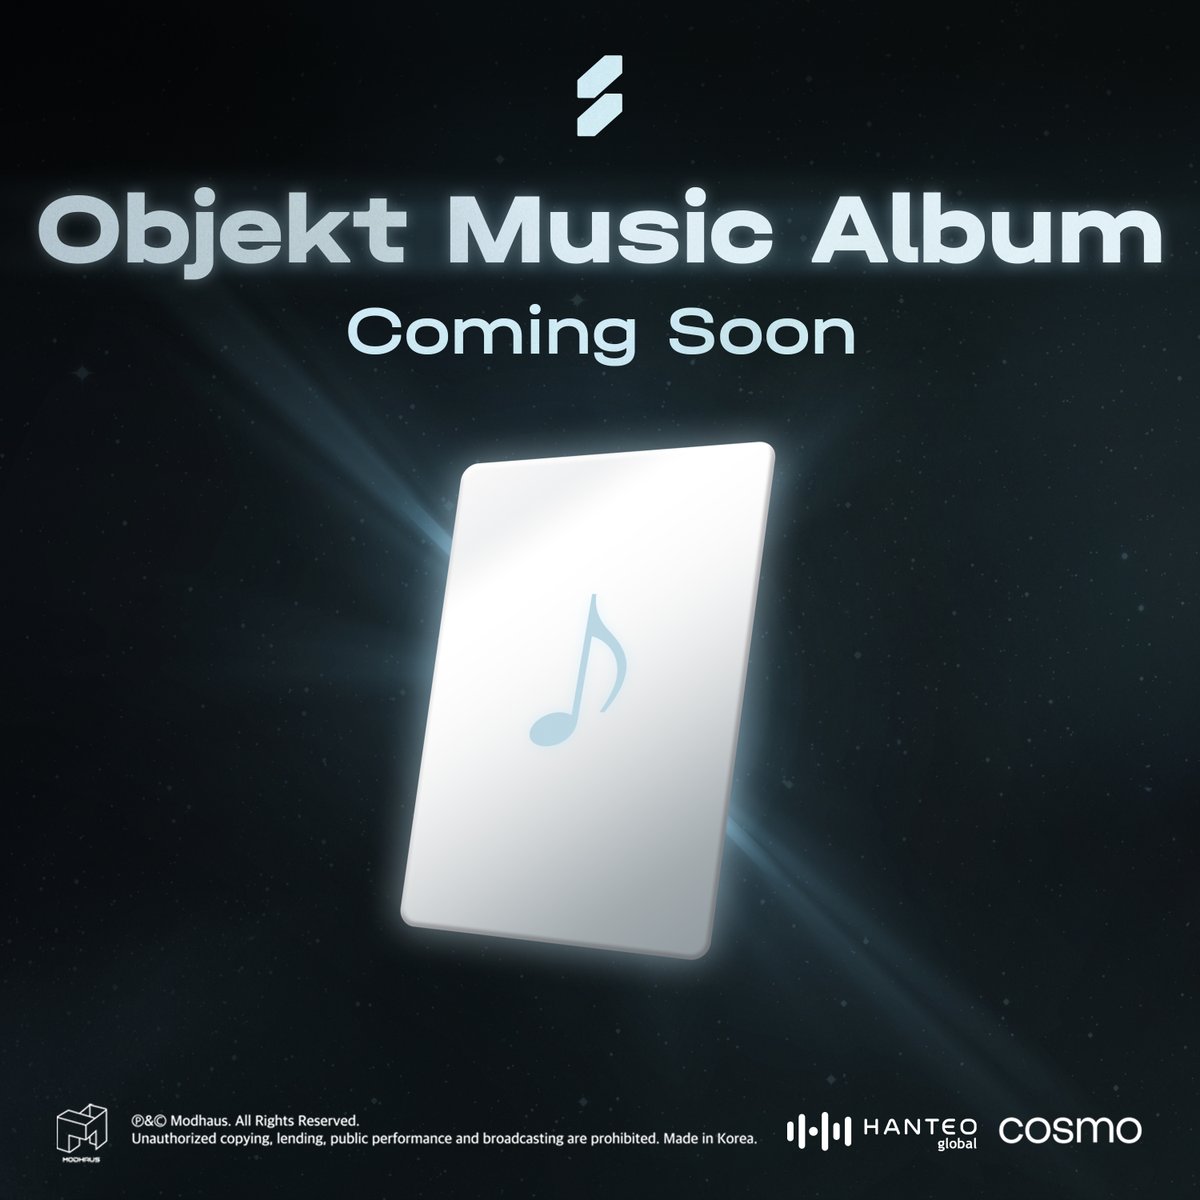 Objekt Music Album Coming Soon Check out <COSMO : the gate> bit.ly/3JlcG0r #COSMO #tripleS #ARTMS